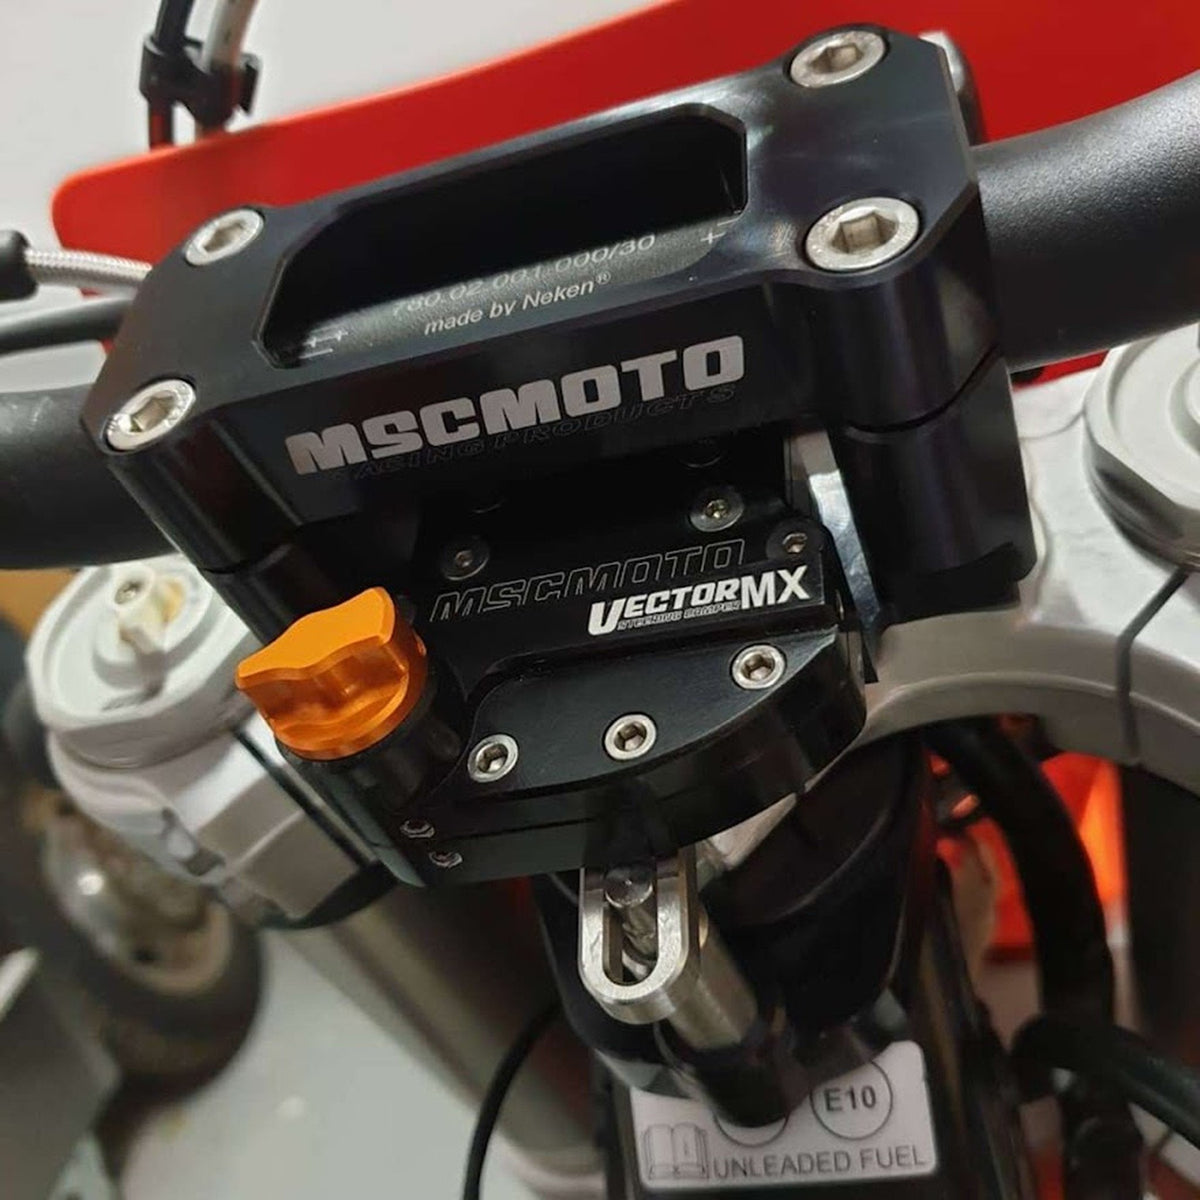 VectorMX Steering Damper Kit &quot;Down Under&quot; Mount (VEC0015) - KTM 85 SX, HUSQVARNA TC 85, VEC0015, Husqvarna MSC Moto, KTM MSC Moto, vectormx, Steering Dampers - Imported and distributed in North &amp; South America by Lindeco Genuine Powersports - Premier Powersports Equipment and Accessories for Motorcycle Enthusiasts, Professional Riders and Dealers.